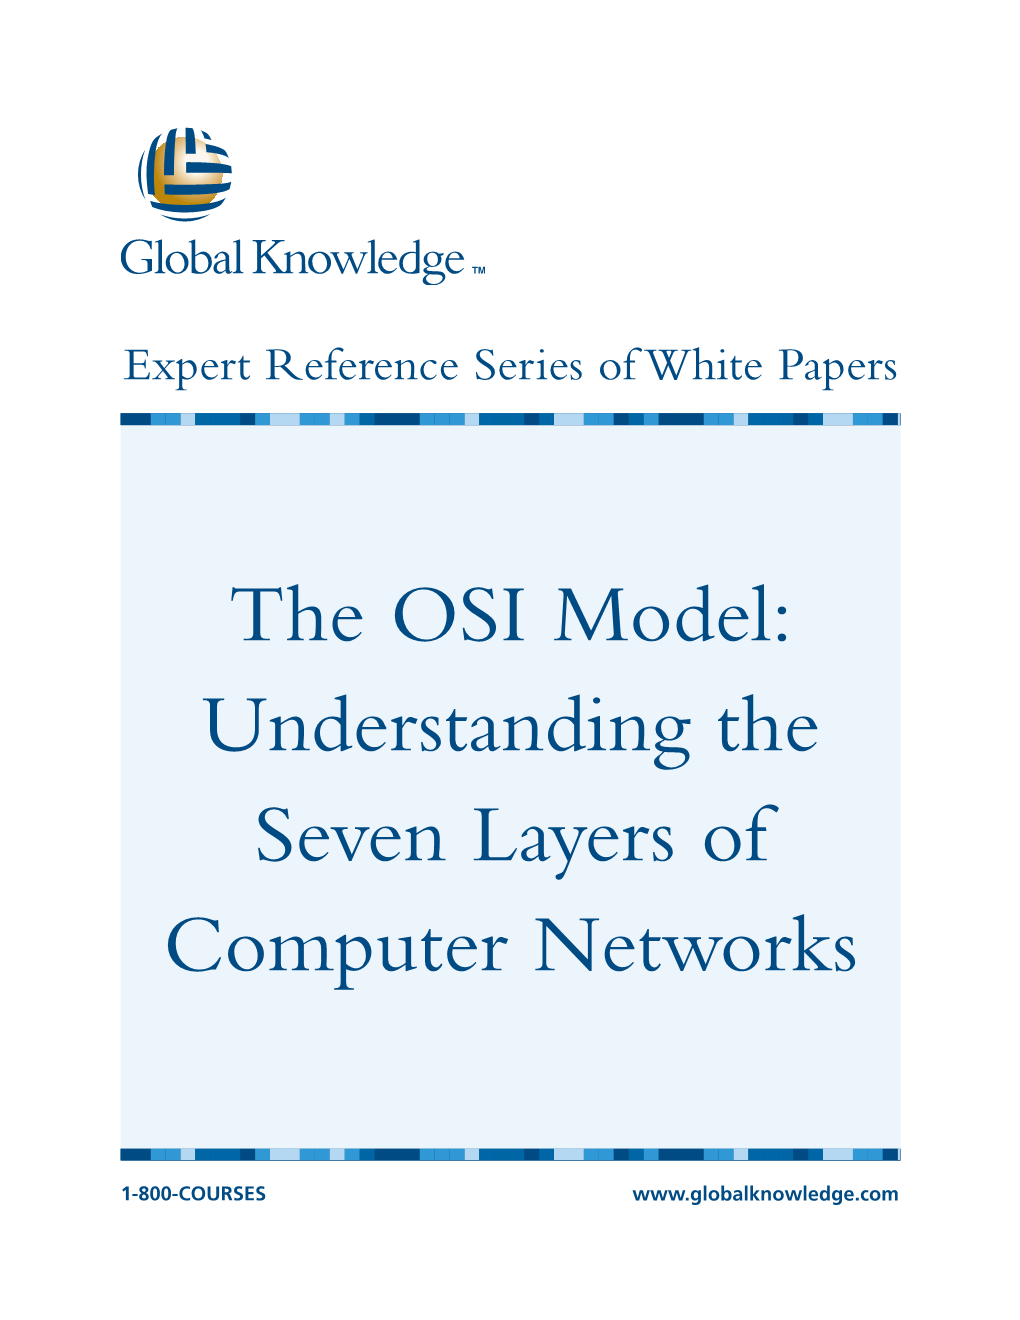 The OSI Model: Understanding the Seven Layers of Computer Networks